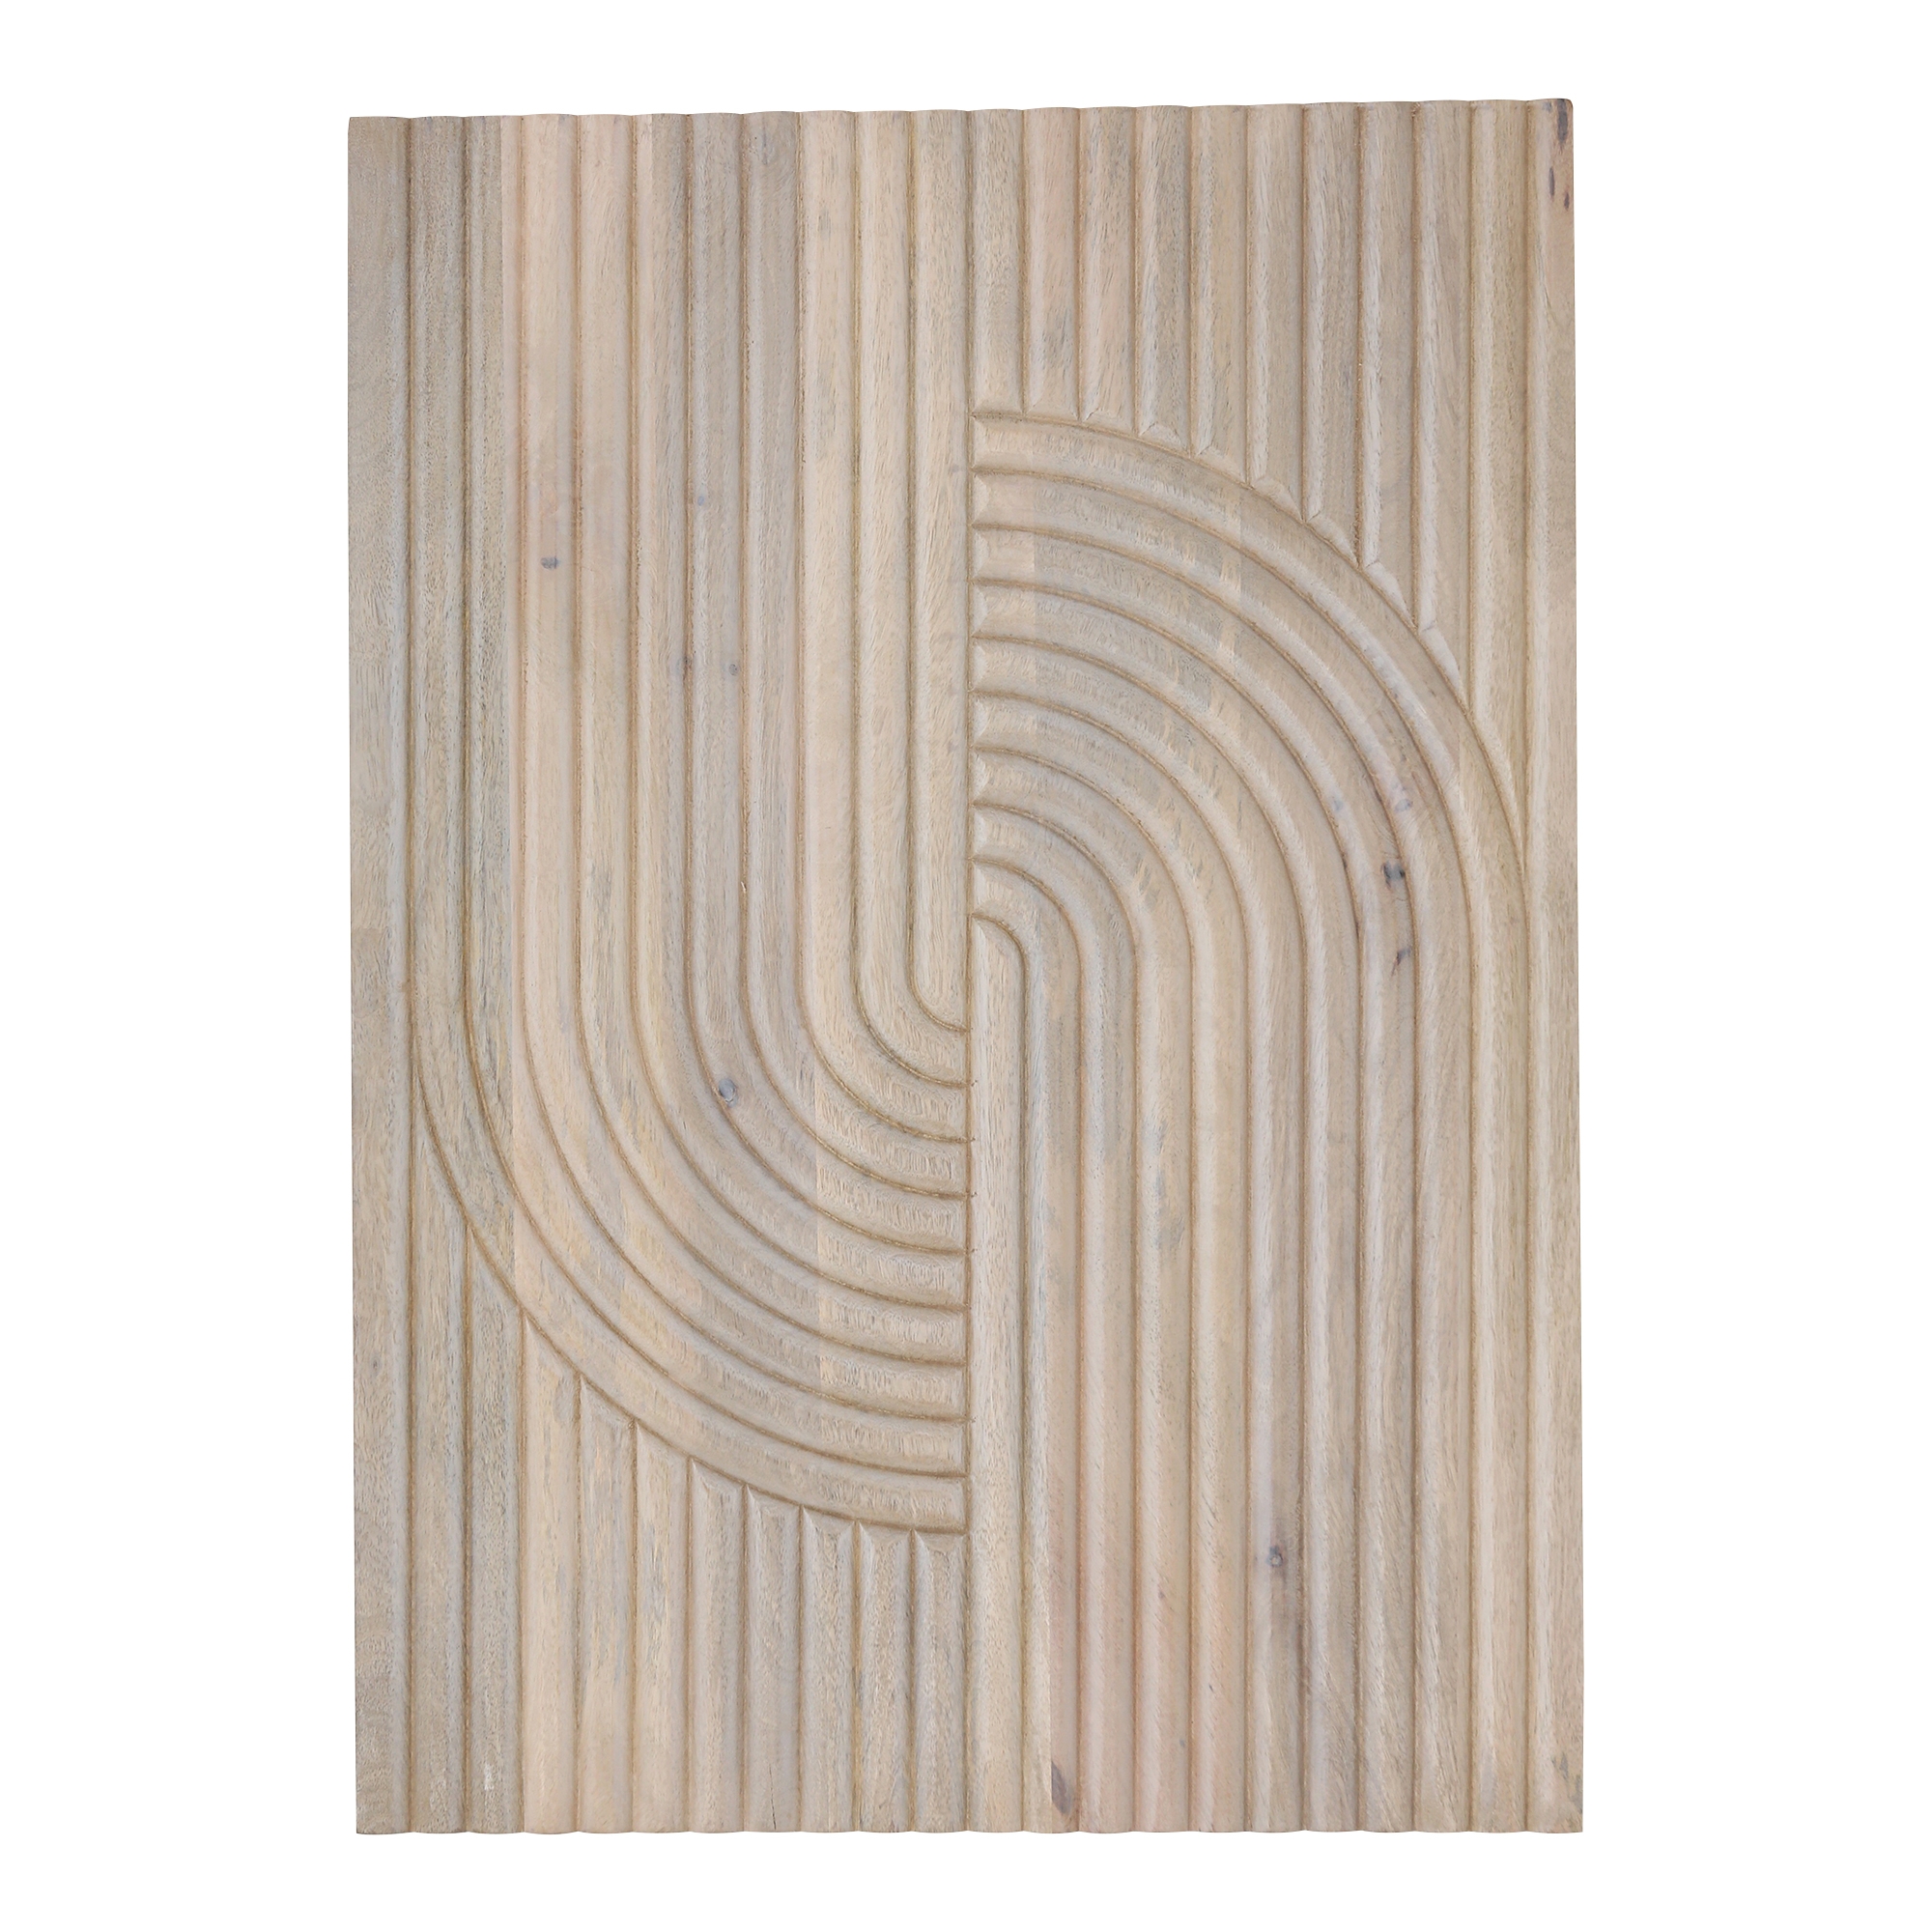 Knott Carved Wood Wall Art - Image 0